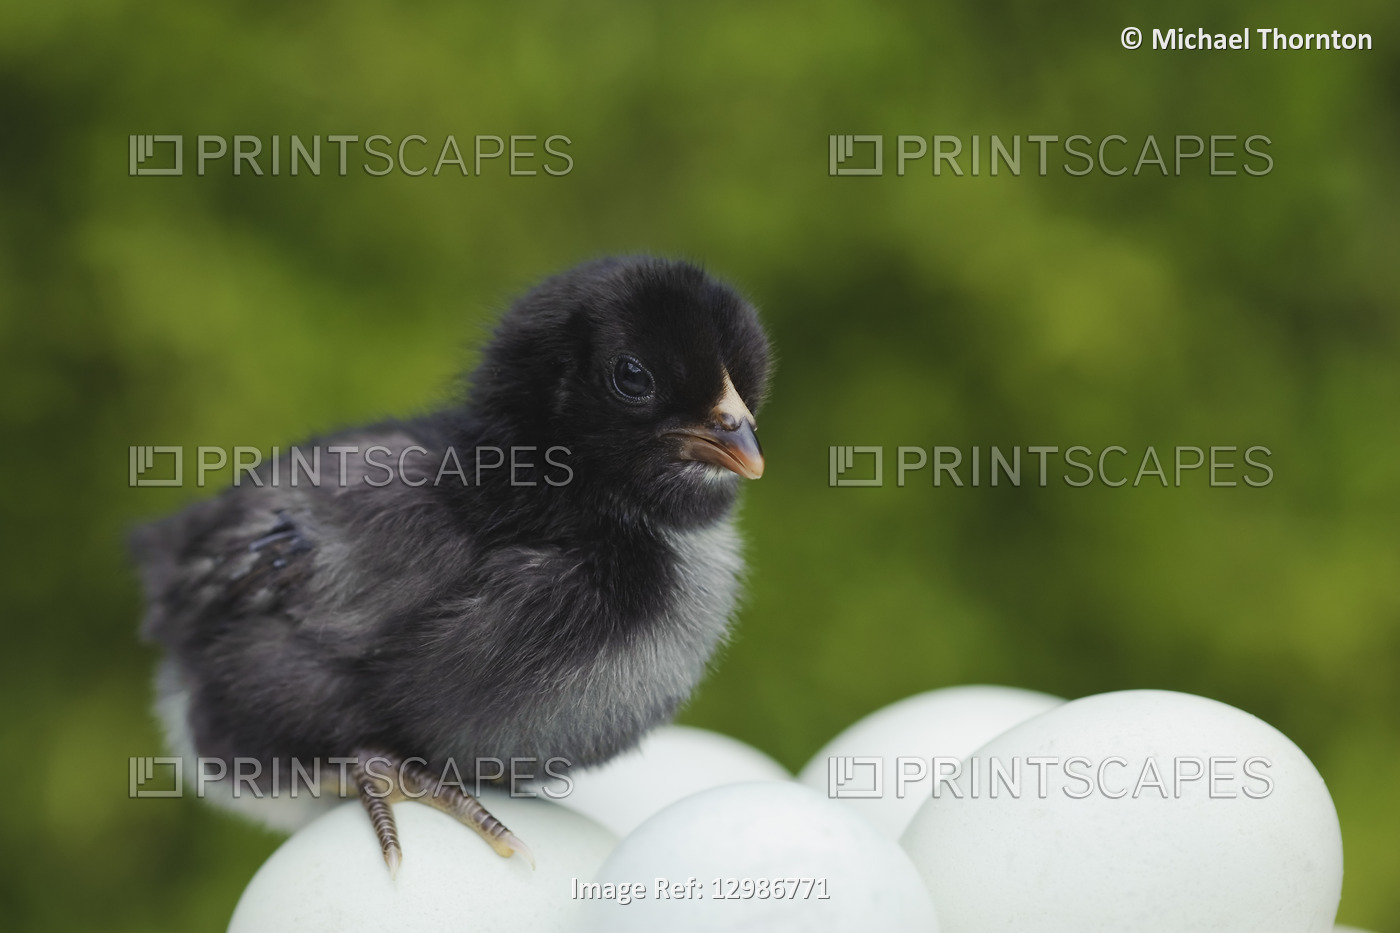 5 day old Araucana chick on unhatched eggs, Newcastle upon Tyne, United Kingdom